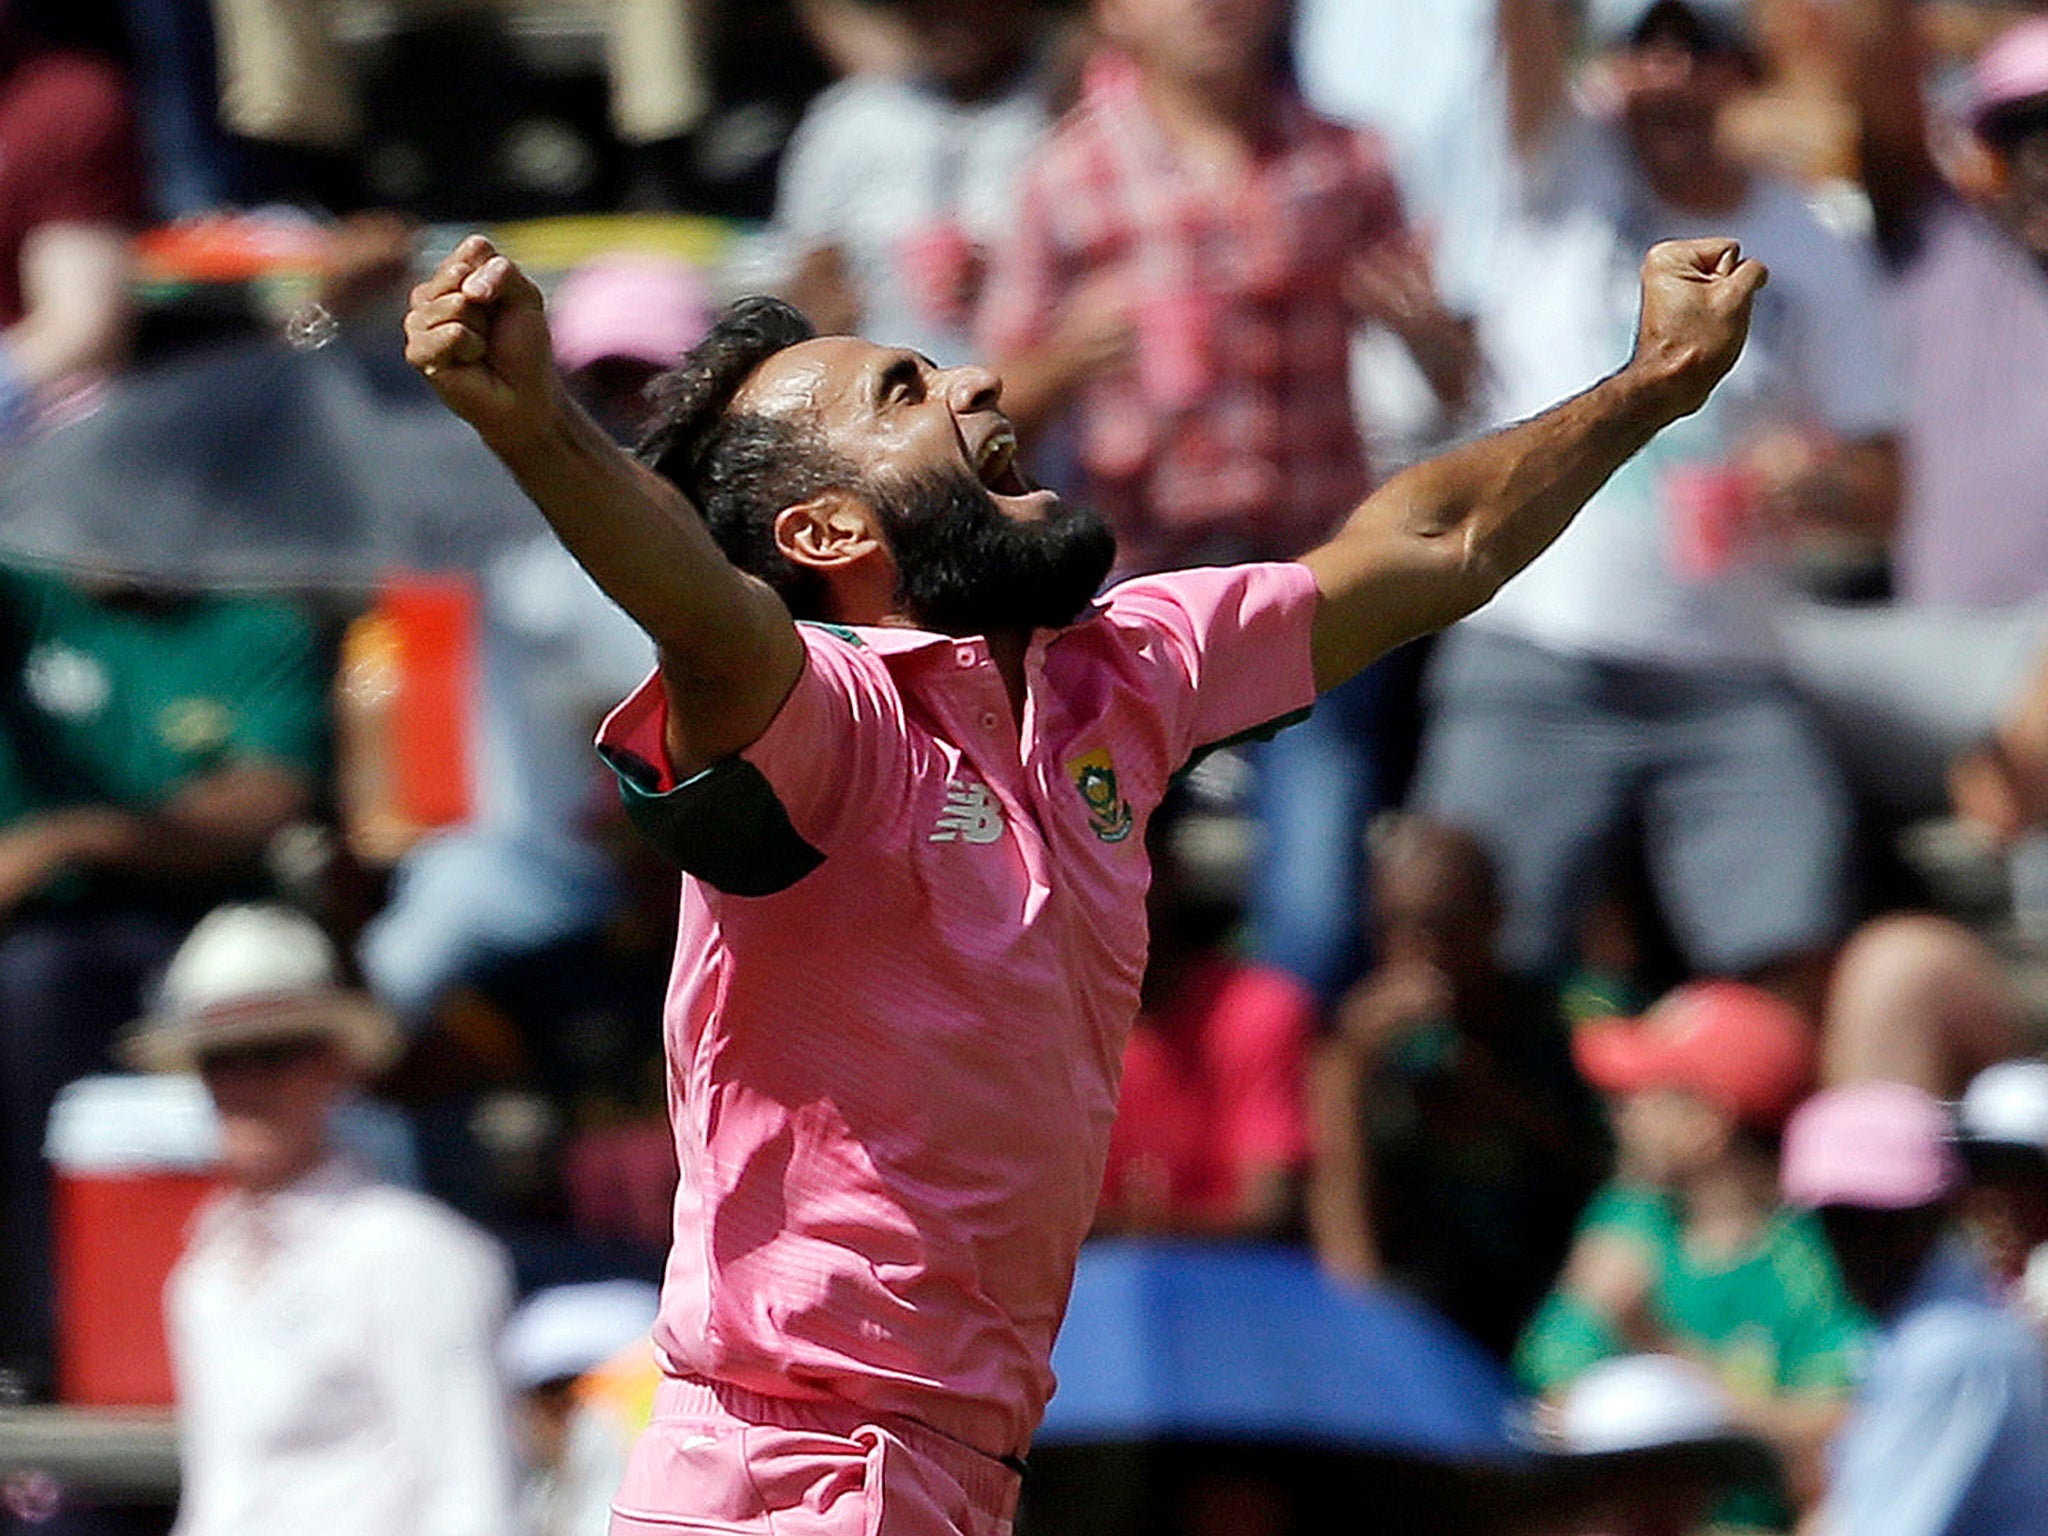 South Africa's bowler Imran Tahir, celebrates after dismissing England's batsman Ben Stokes, for 2 runs during the 4th One Day International cricket match between South Africa and England